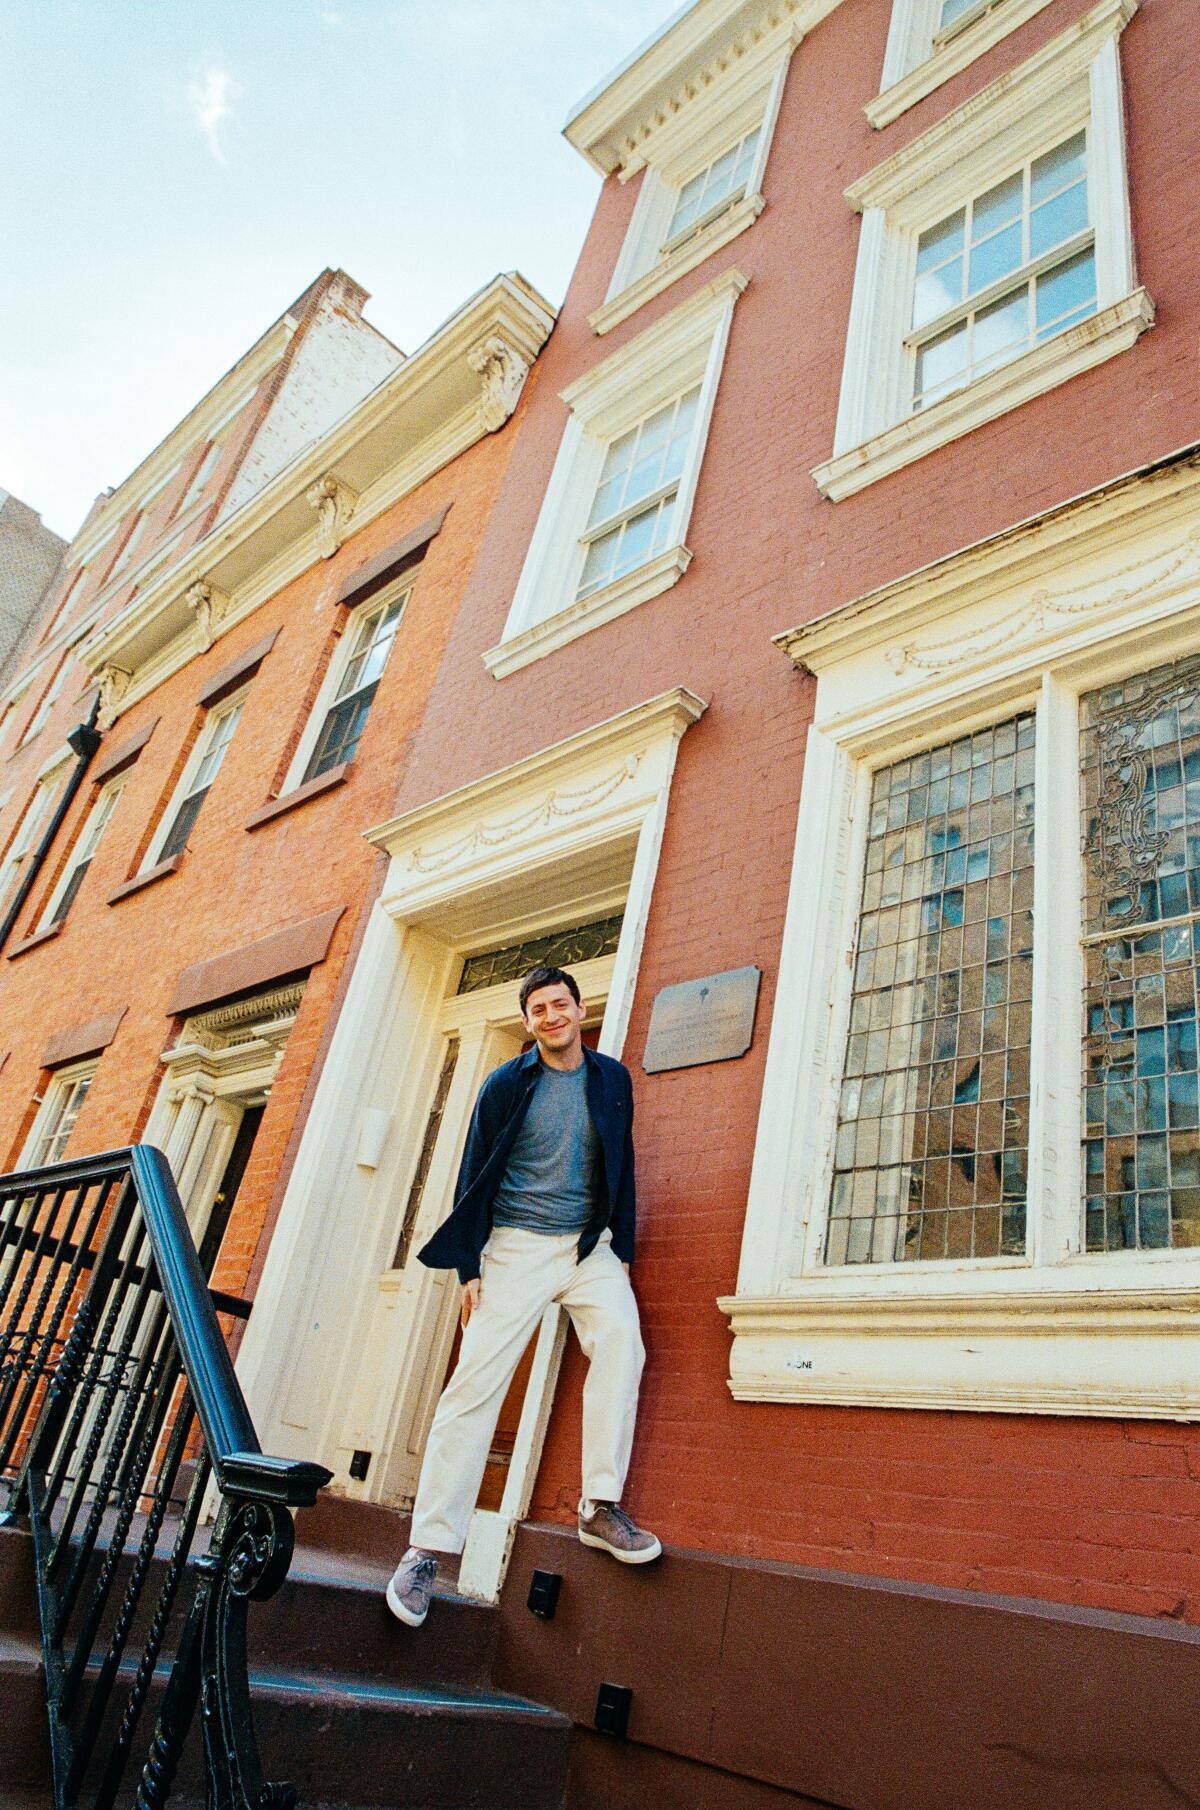 A man in front of a brick building.